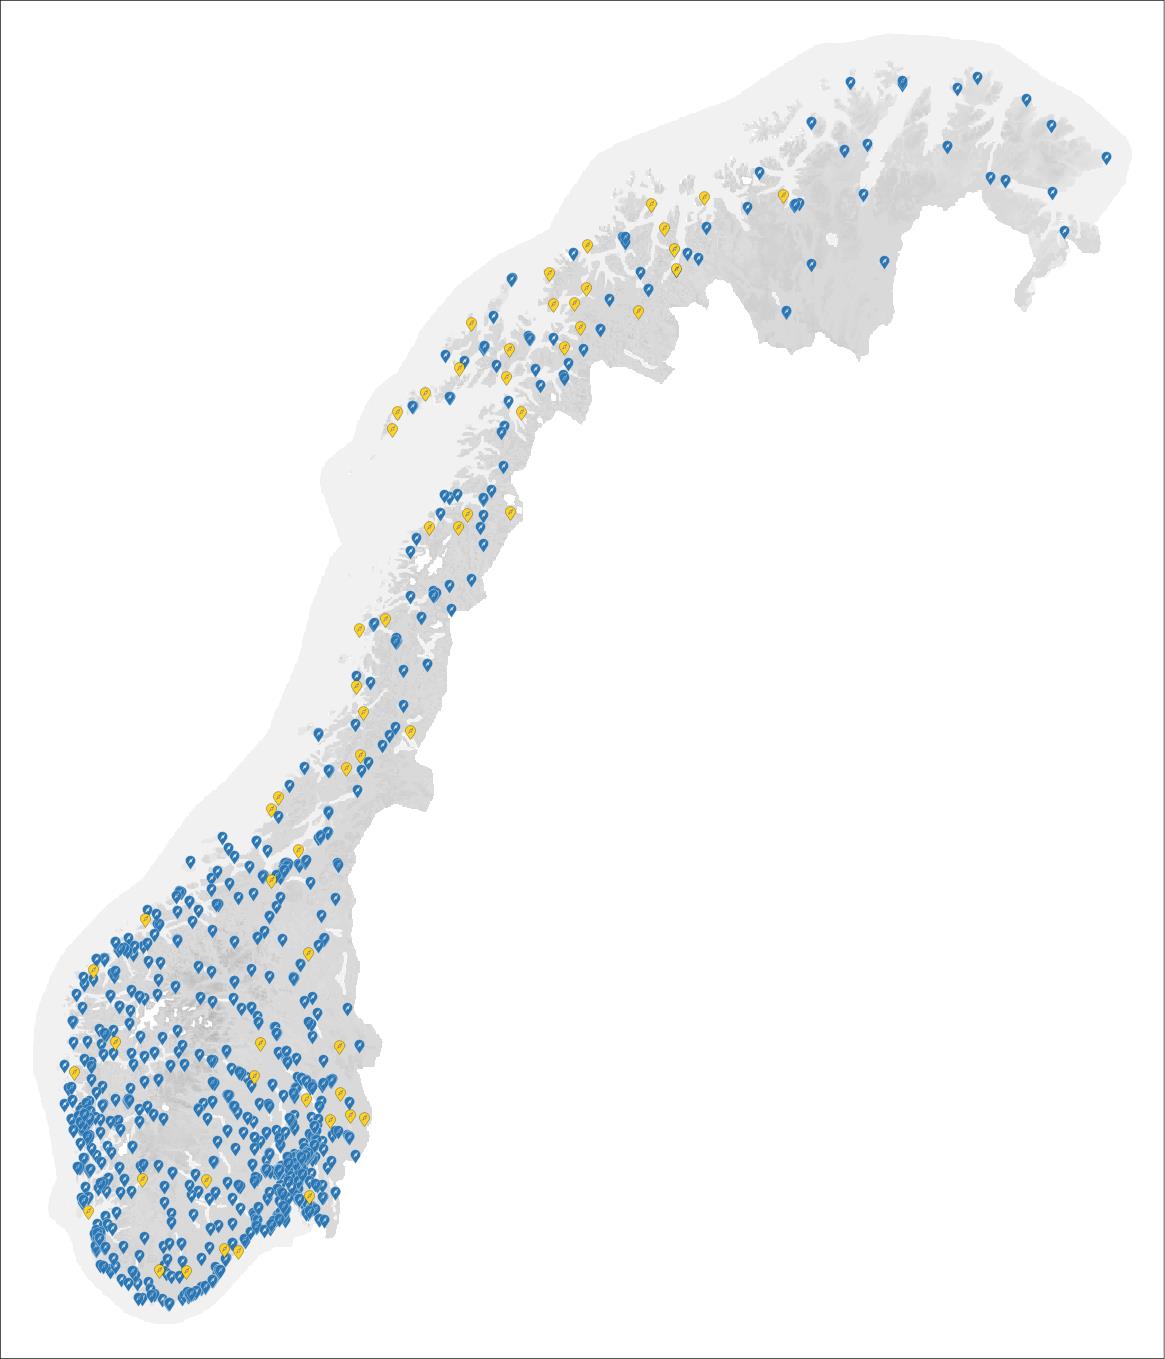 Illustration. Map of norway. Rapid chargers in operation as of November 2022 (blue) and rapid chargers supported by Enova June 2022 which will be in operation at the latest June 2023 (yellow)